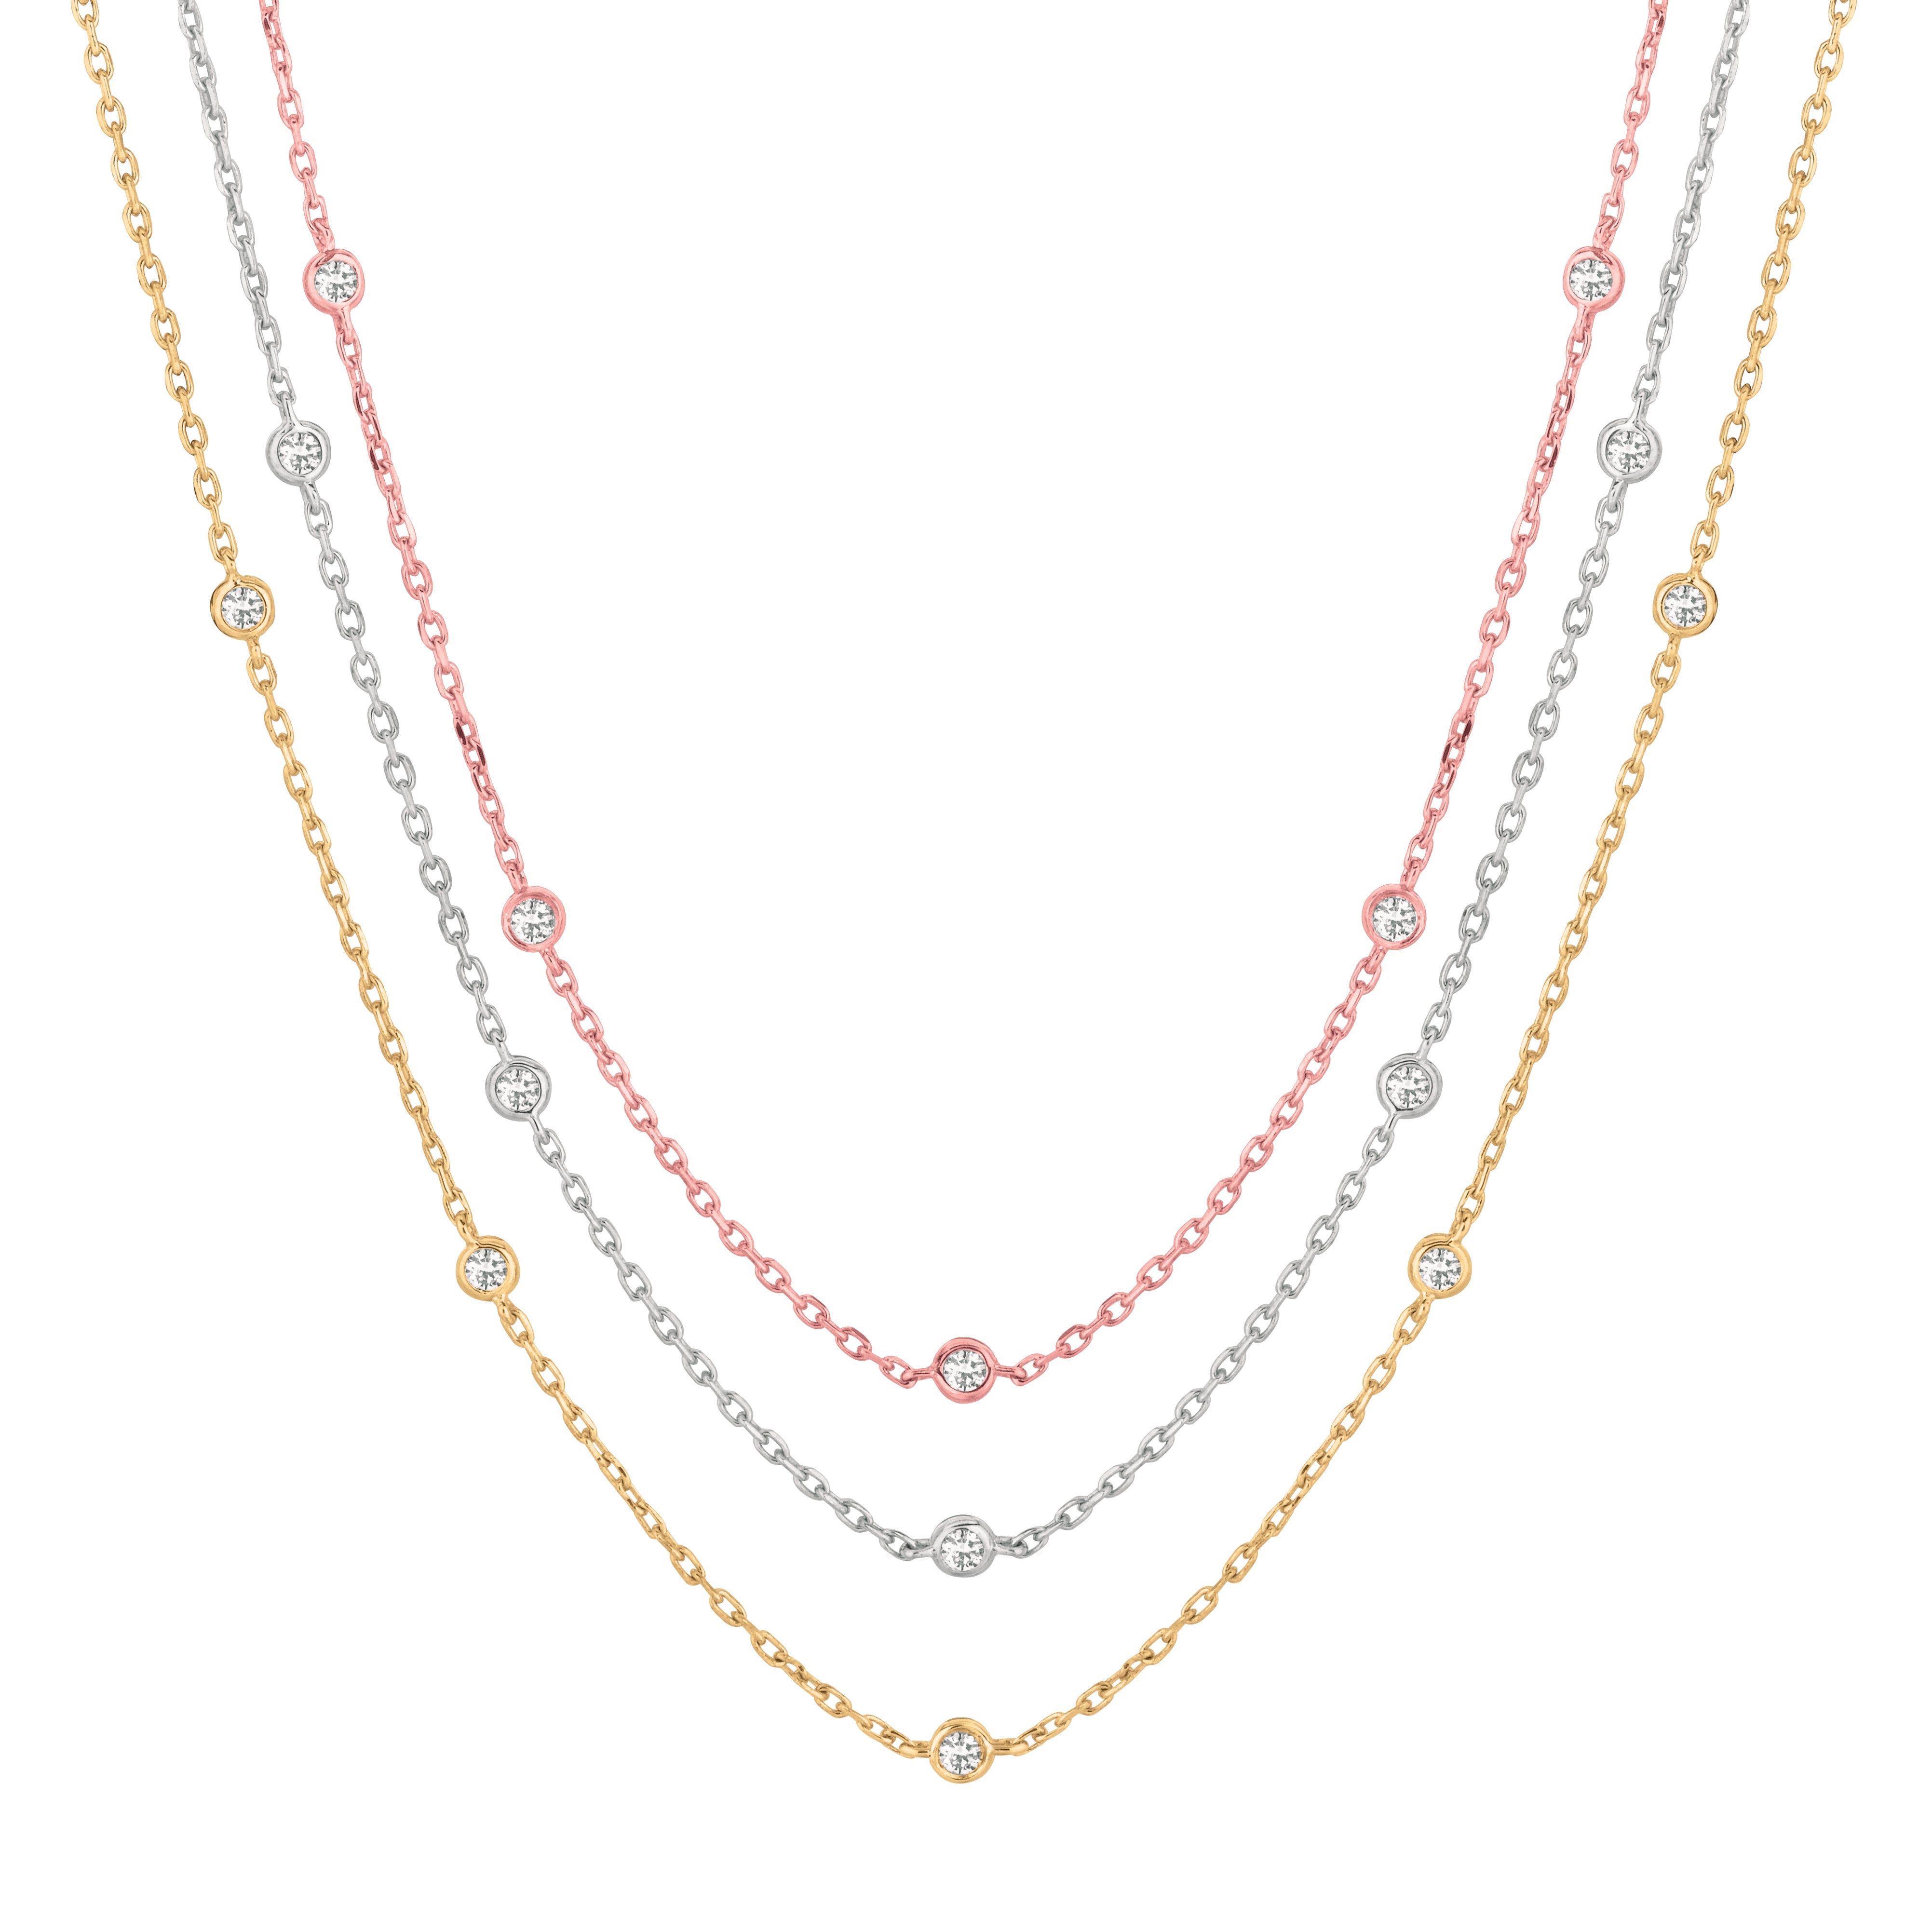 1.50CTW BR DIA BY YARD NECKLACE 18